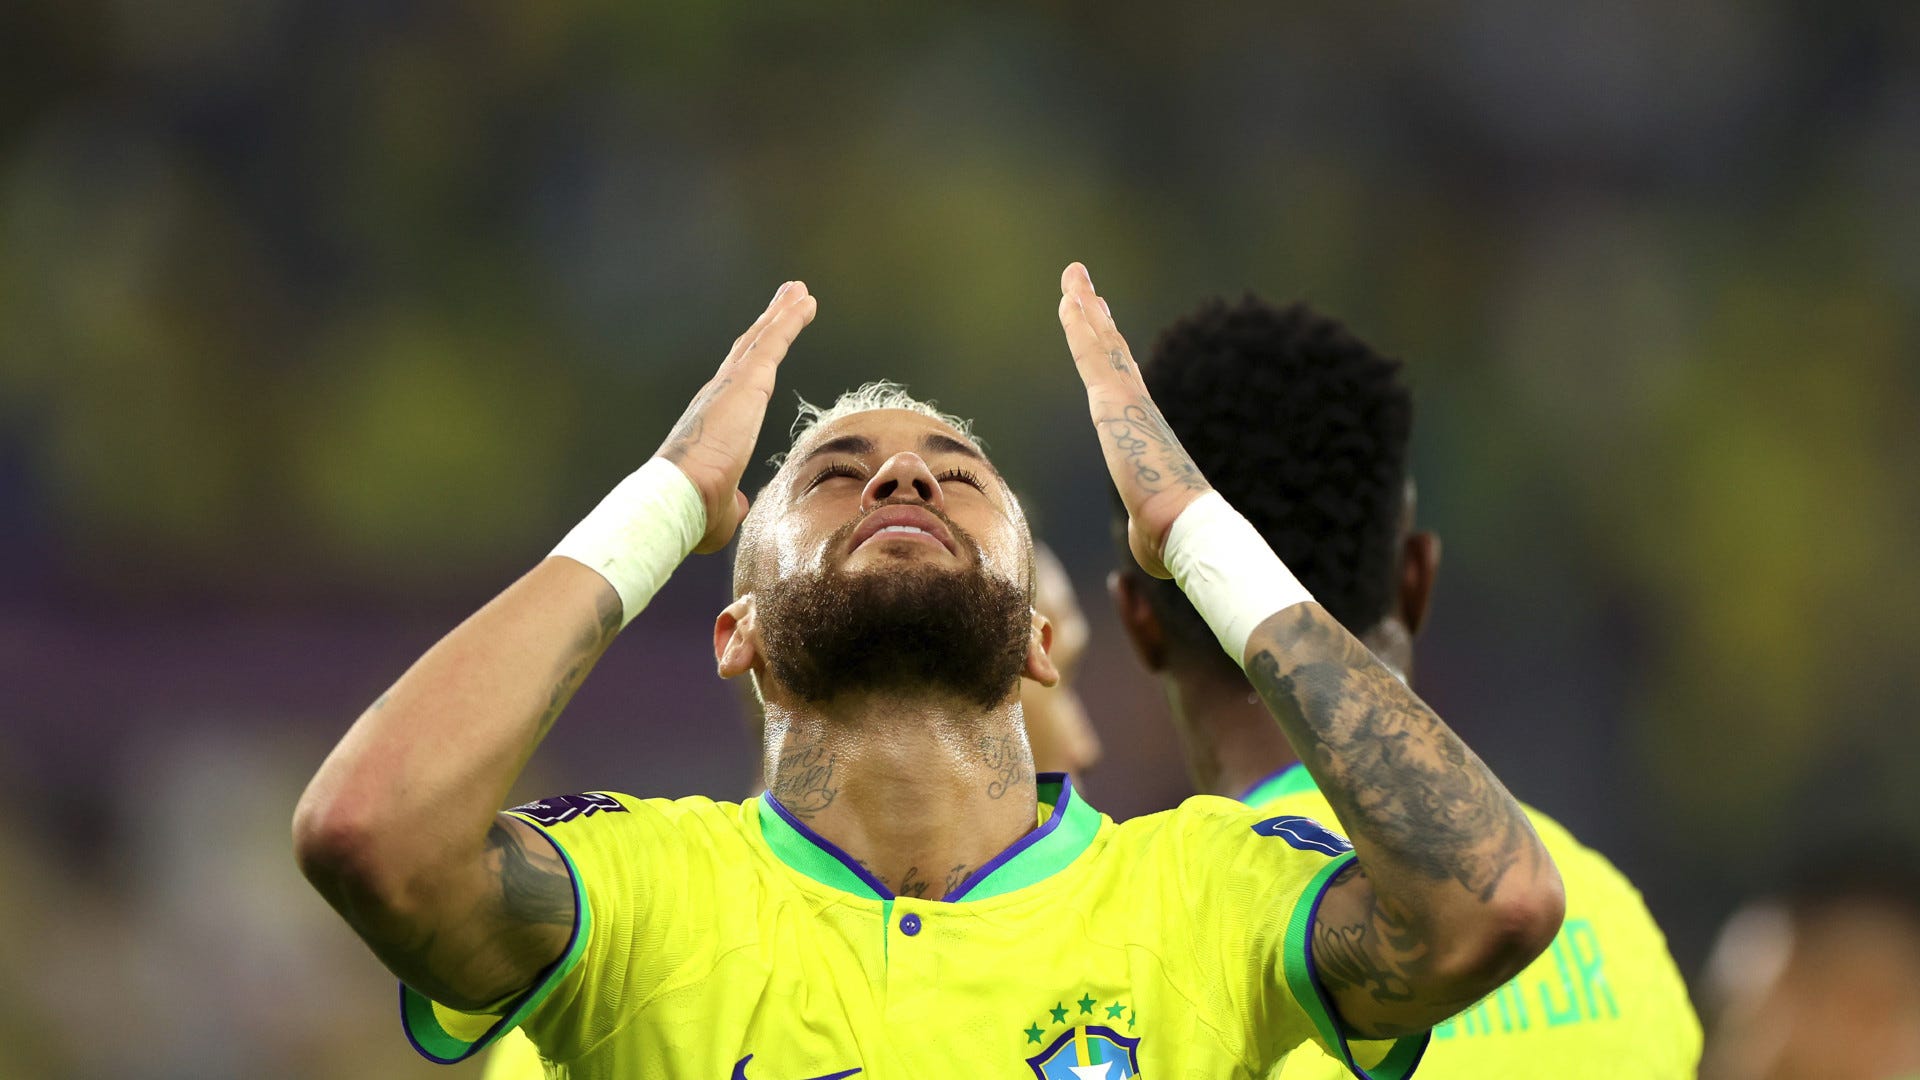 Explained: Why Neymar ran to the stands in penalty strike celebrations for Brazil against South Korea | Goal.com UK